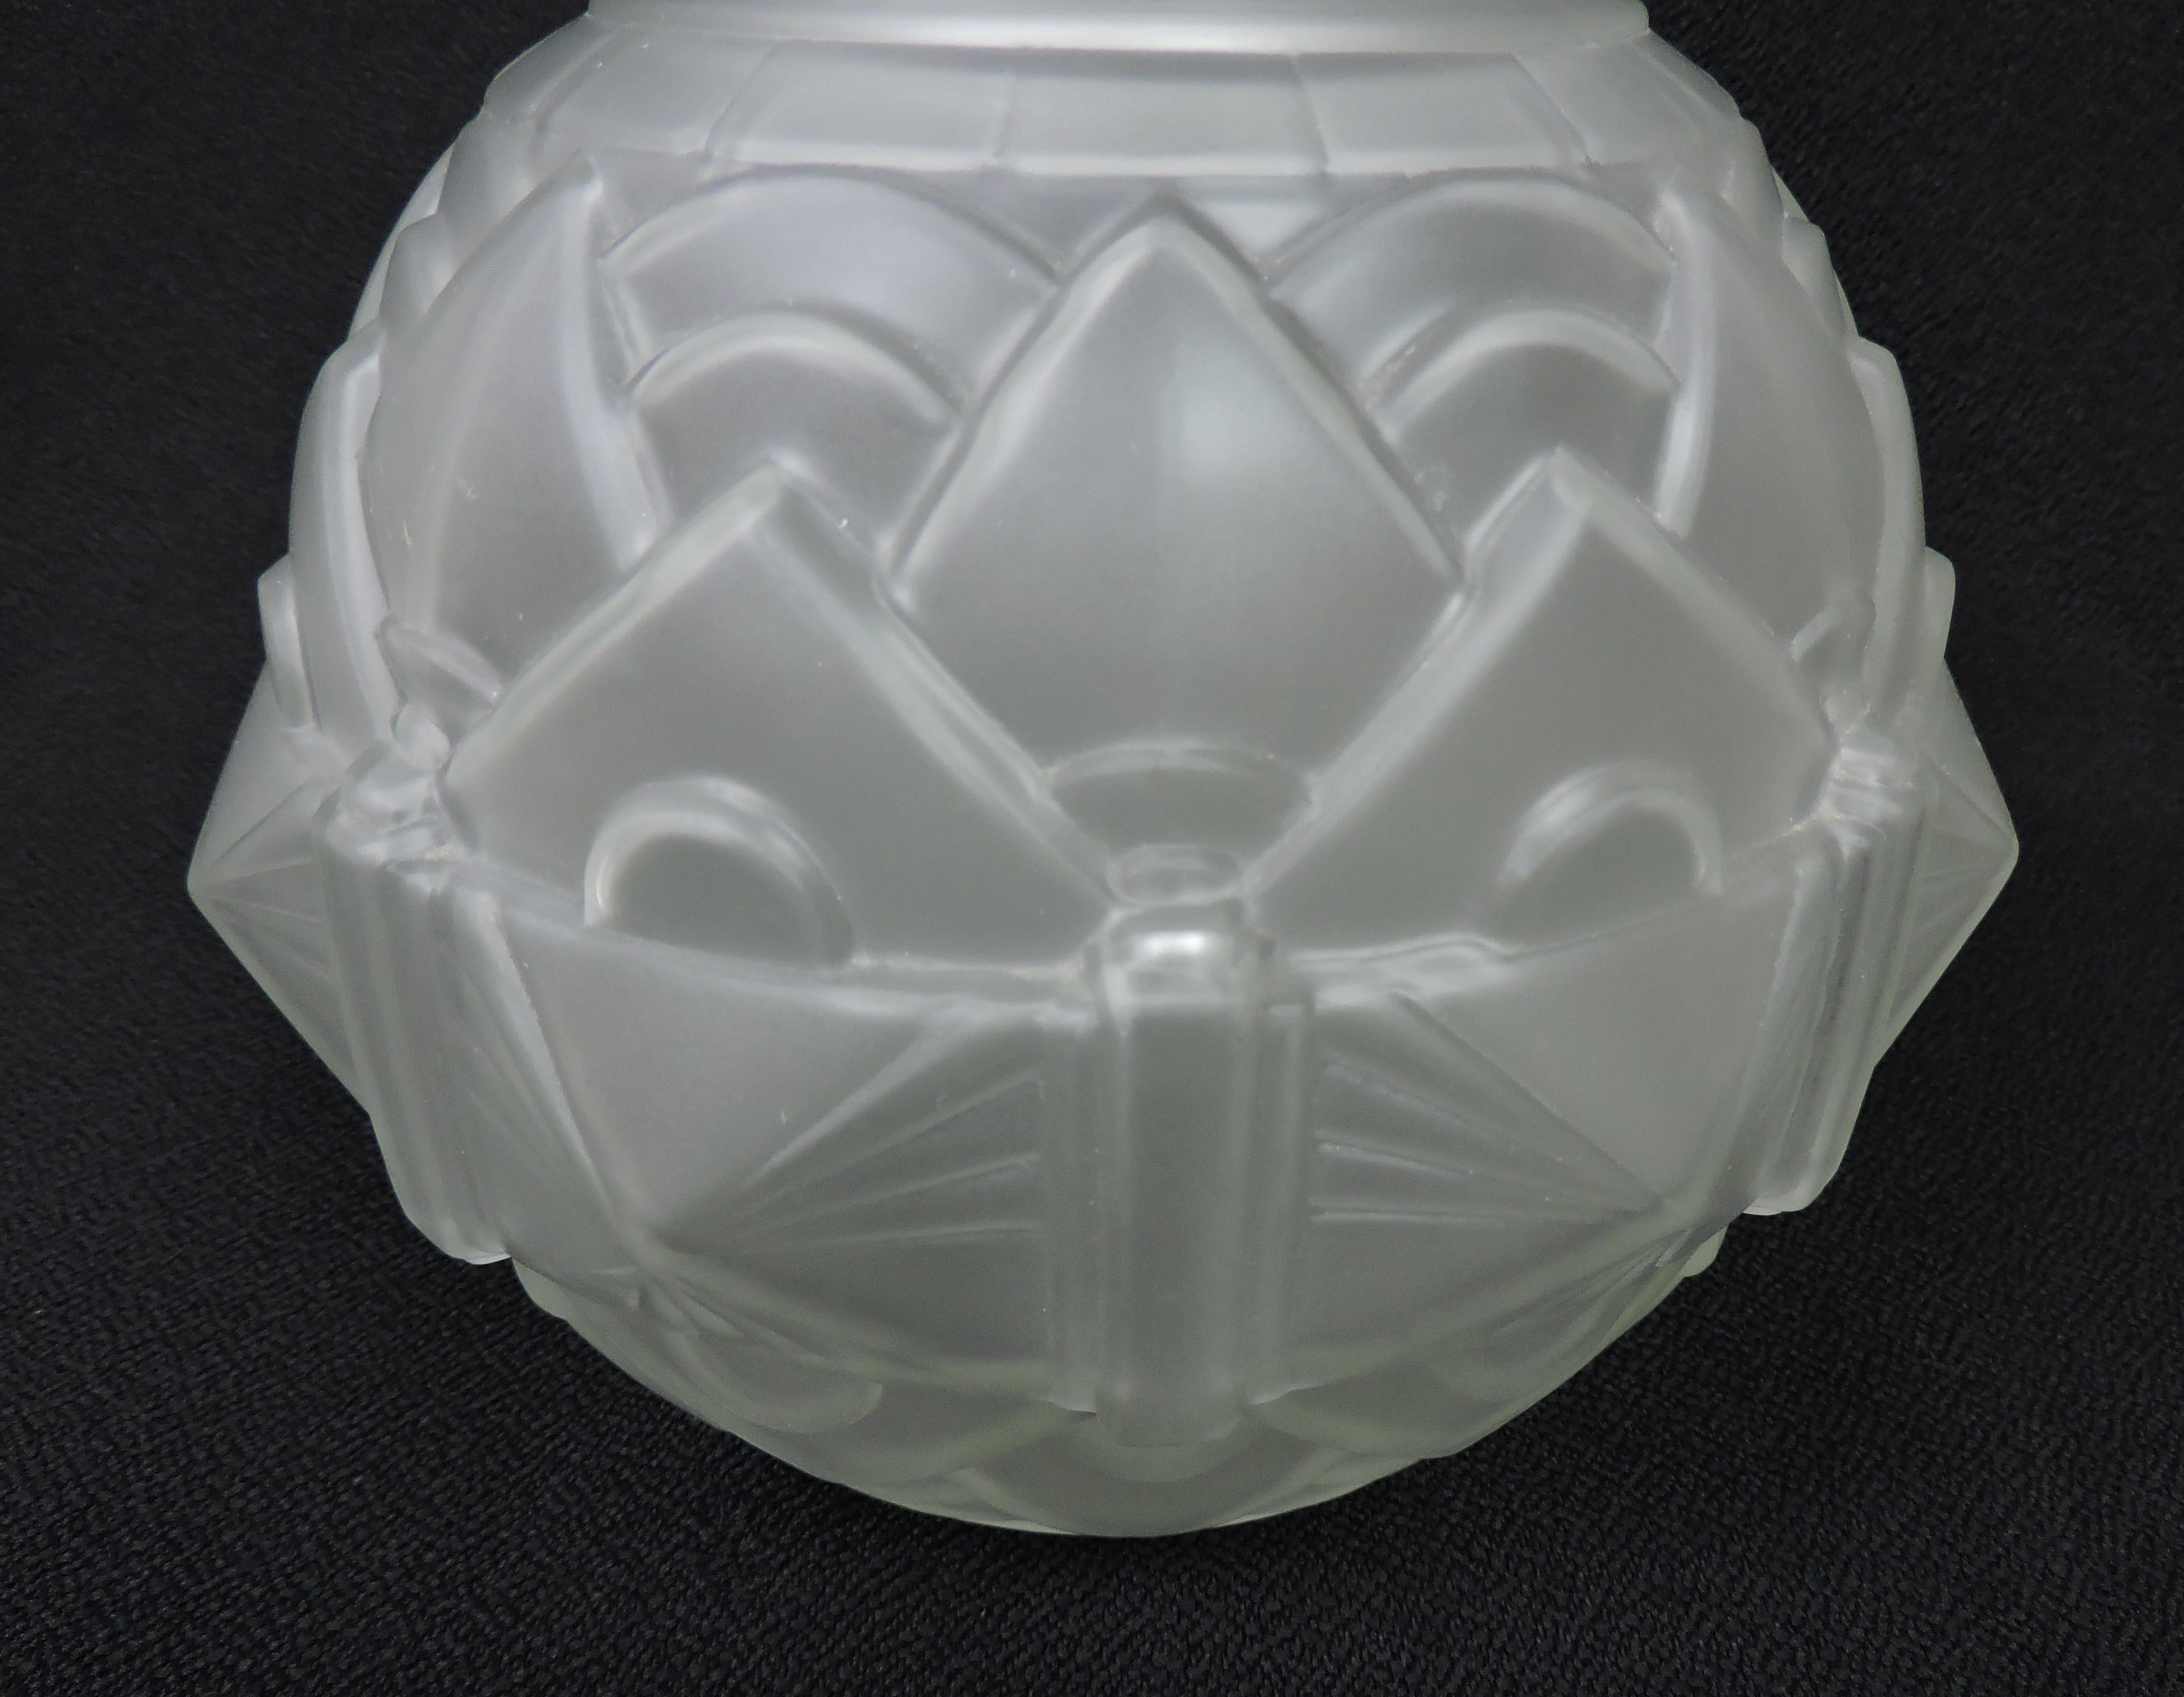 Mid-20th Century French Art Deco Geometric Design Frosted Glass Ball Vase For Sale